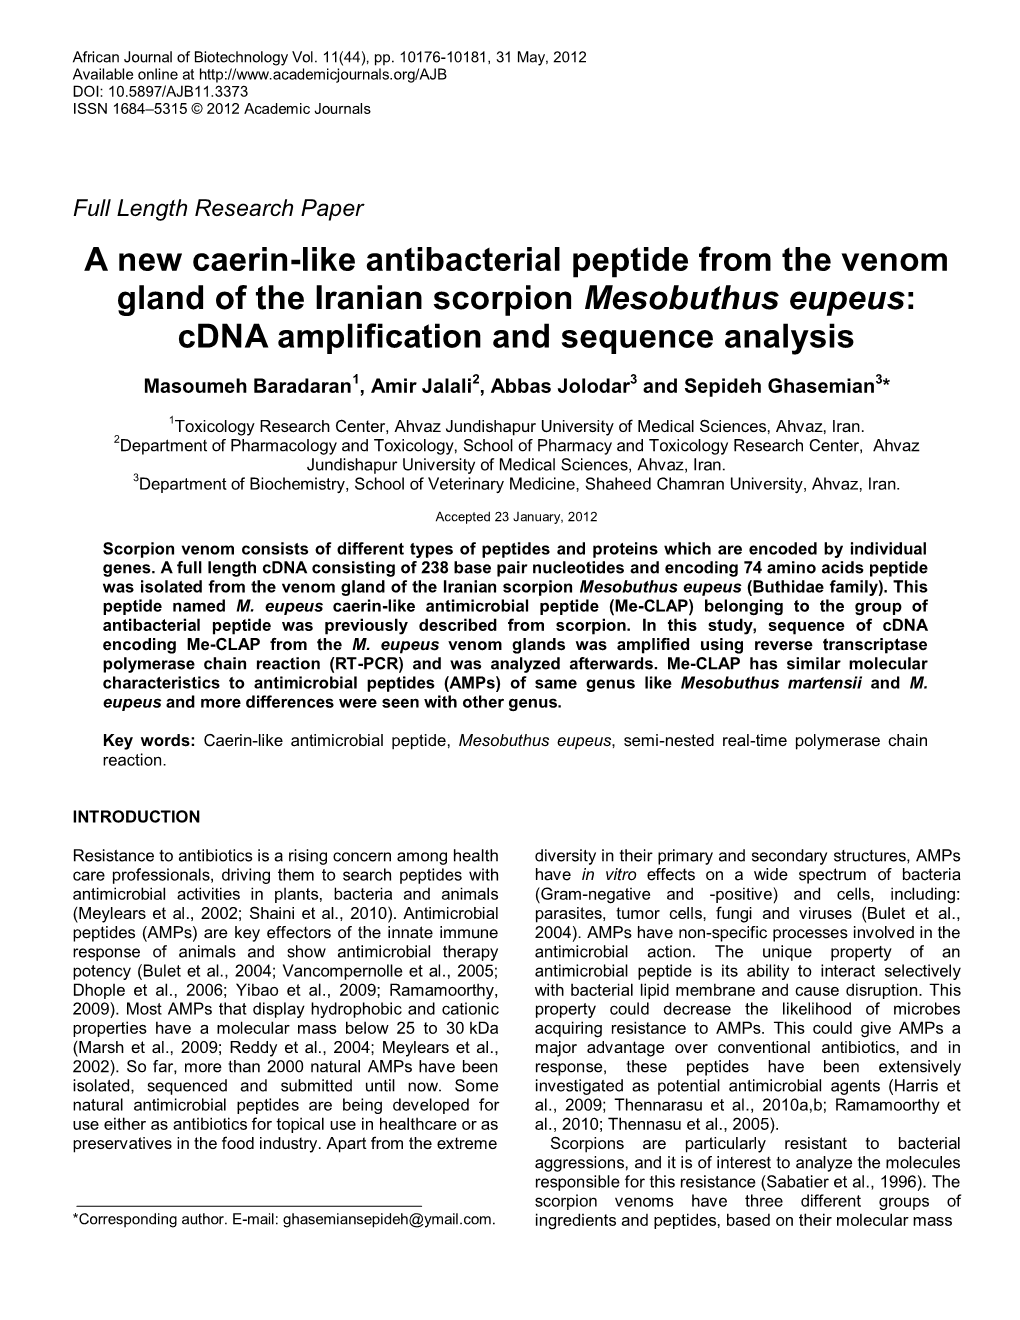 A New Caerin-Like Antibacterial Peptide from the Venom Gland of the Iranian Scorpion Mesobuthus Eupeus: Cdna Amplification and Sequence Analysis